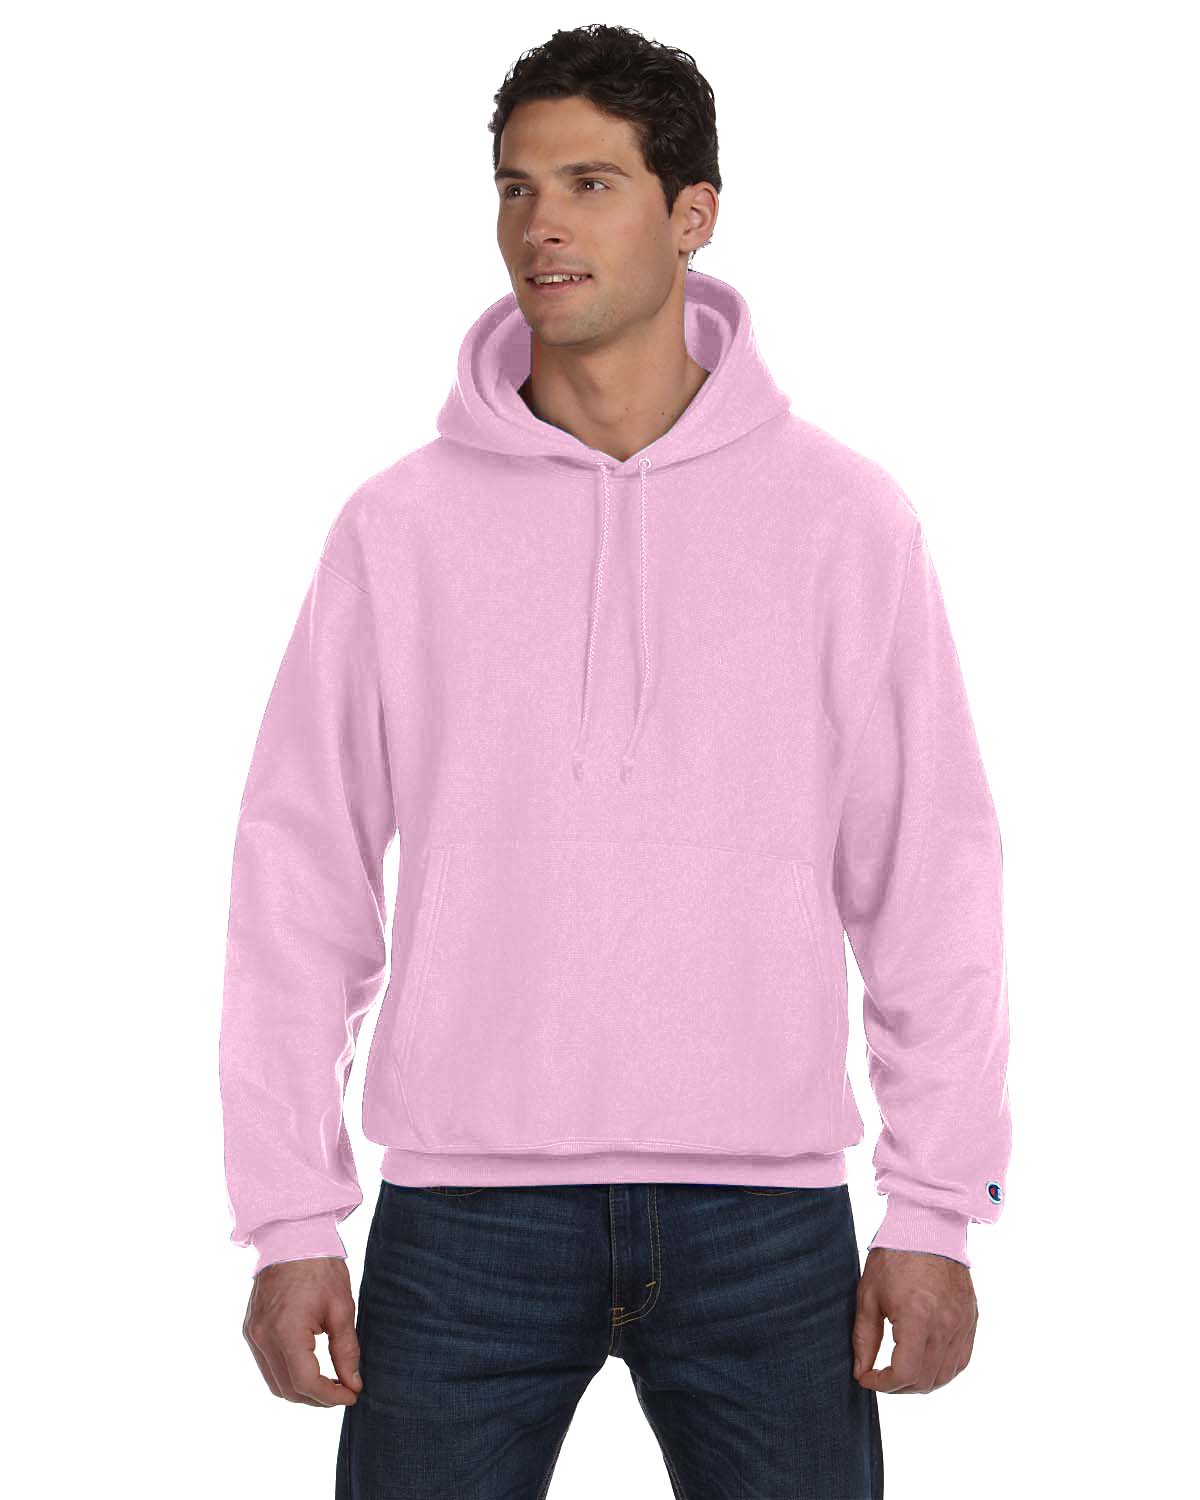 Champion S1051 PINK CANDY Reverse Weave 